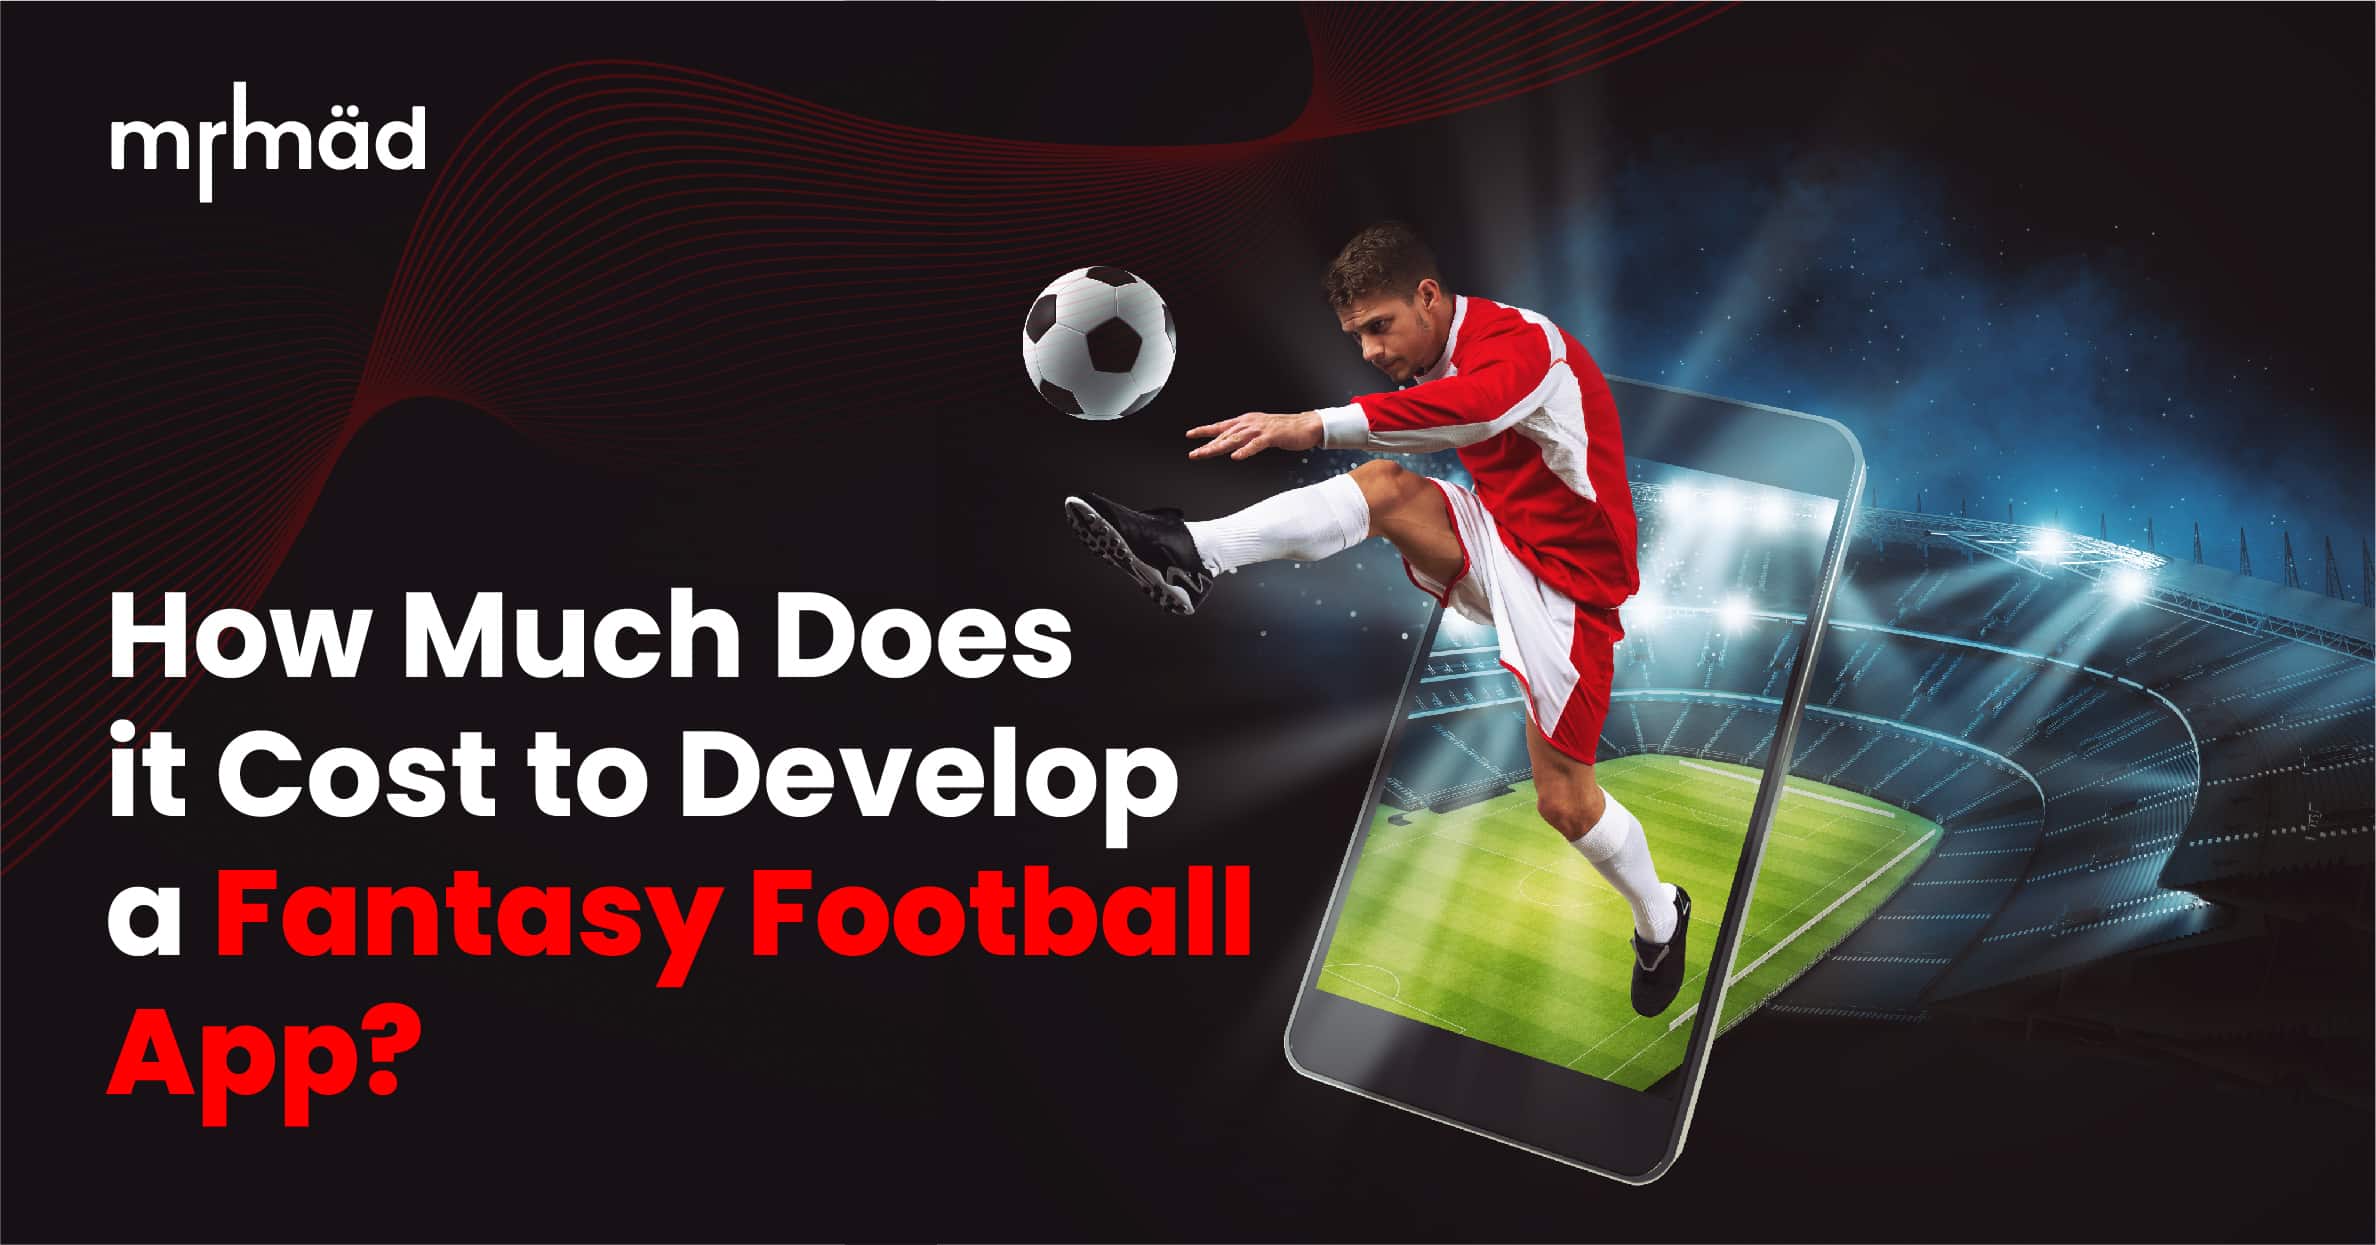 Cost to Develop a Fantasy Football App